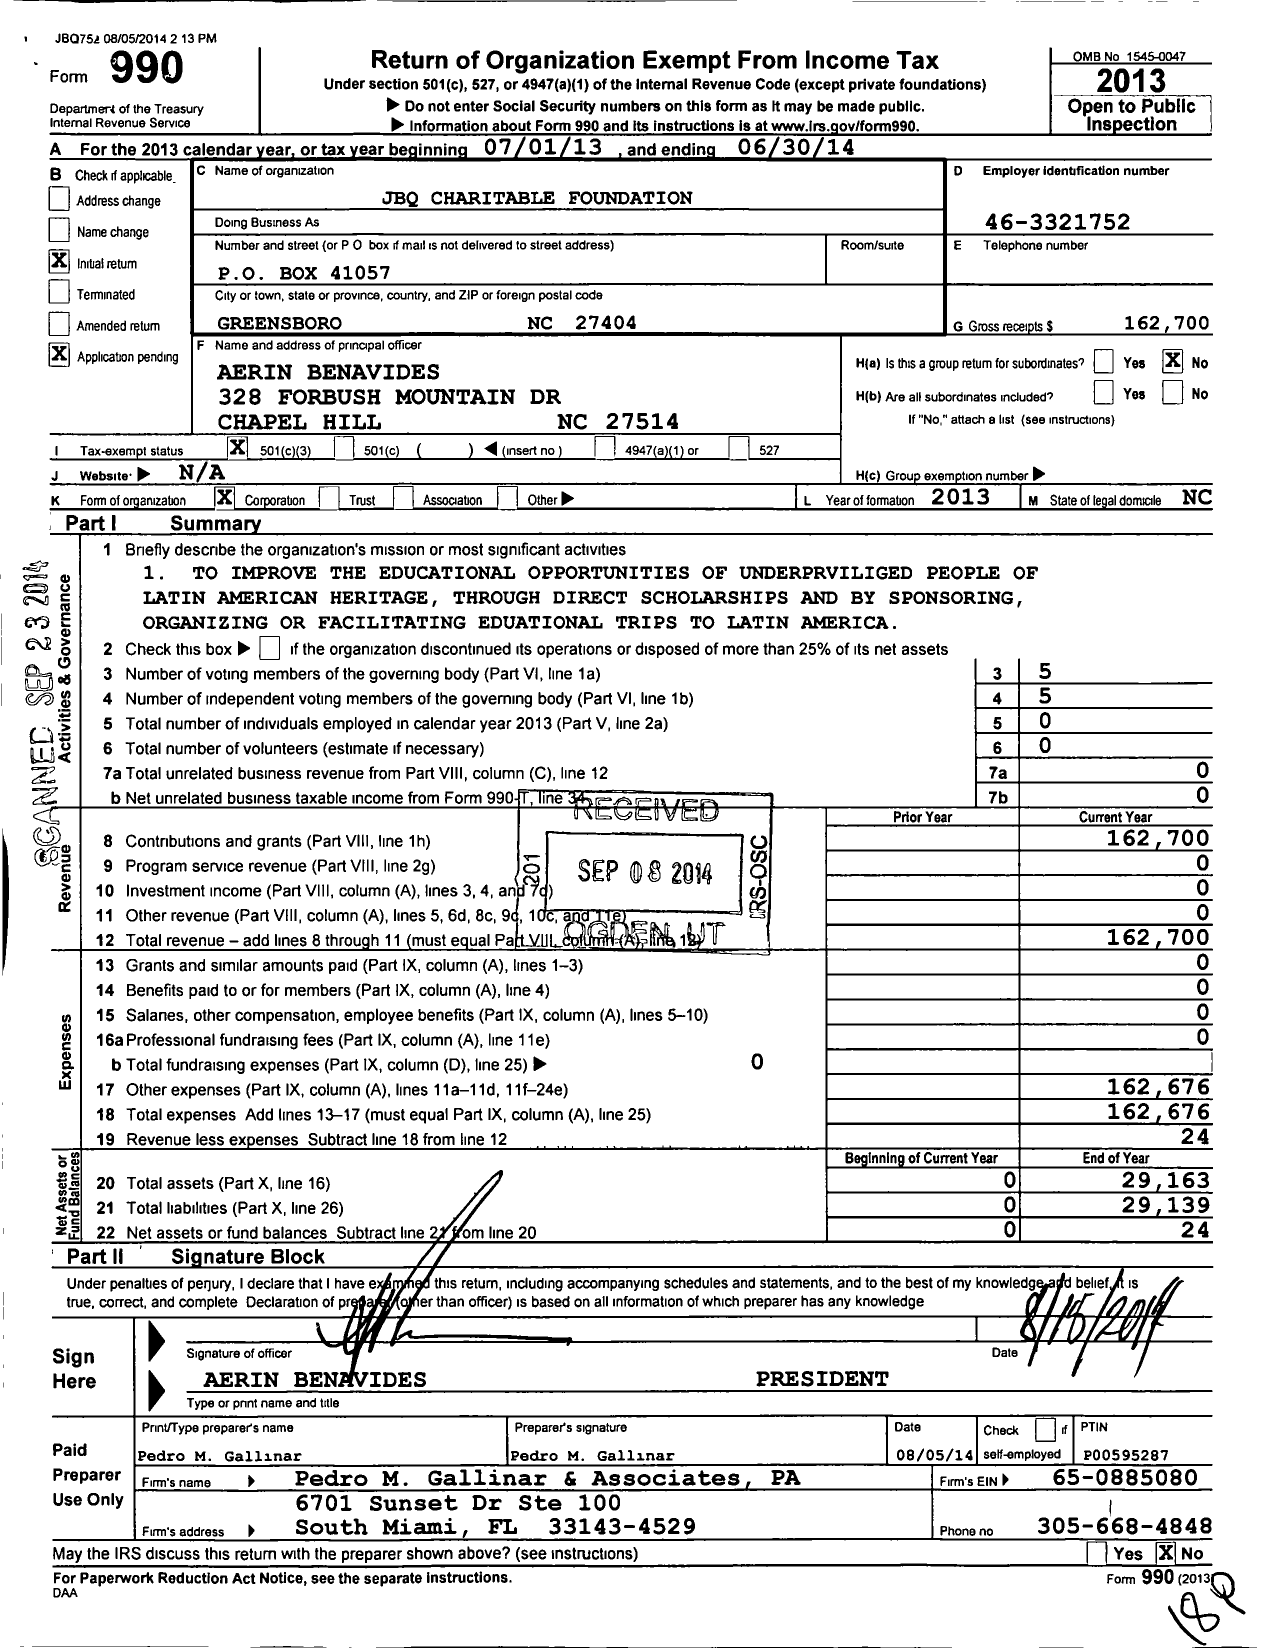 Image of first page of 2013 Form 990 for JBQ Charitable Foundation